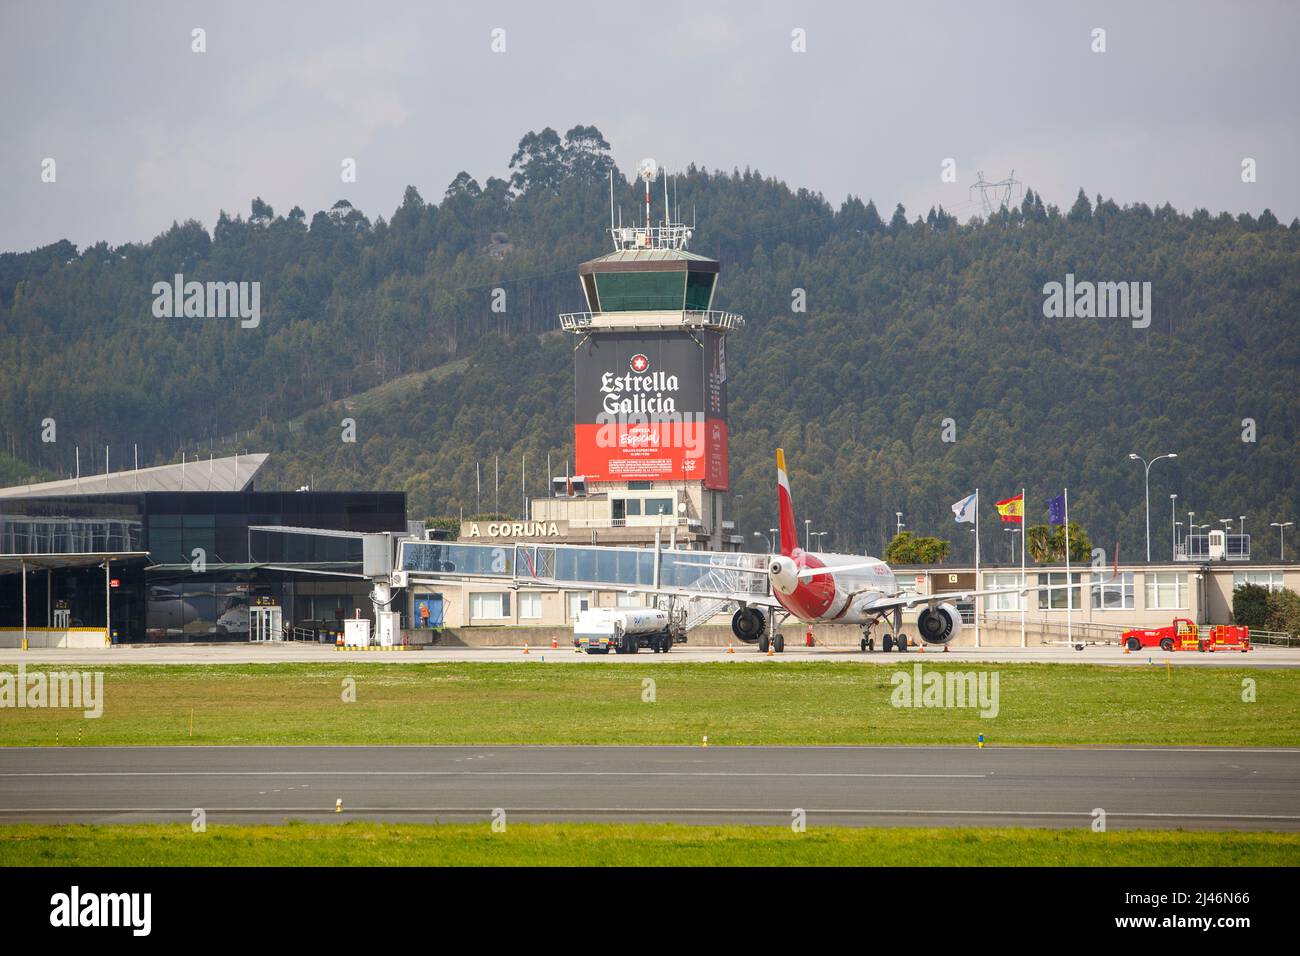 A Coruña-Spain. Alvedro Airport in A Coruña with several passenger planes parked on the runway as of March 30, 2022 Stock Photo